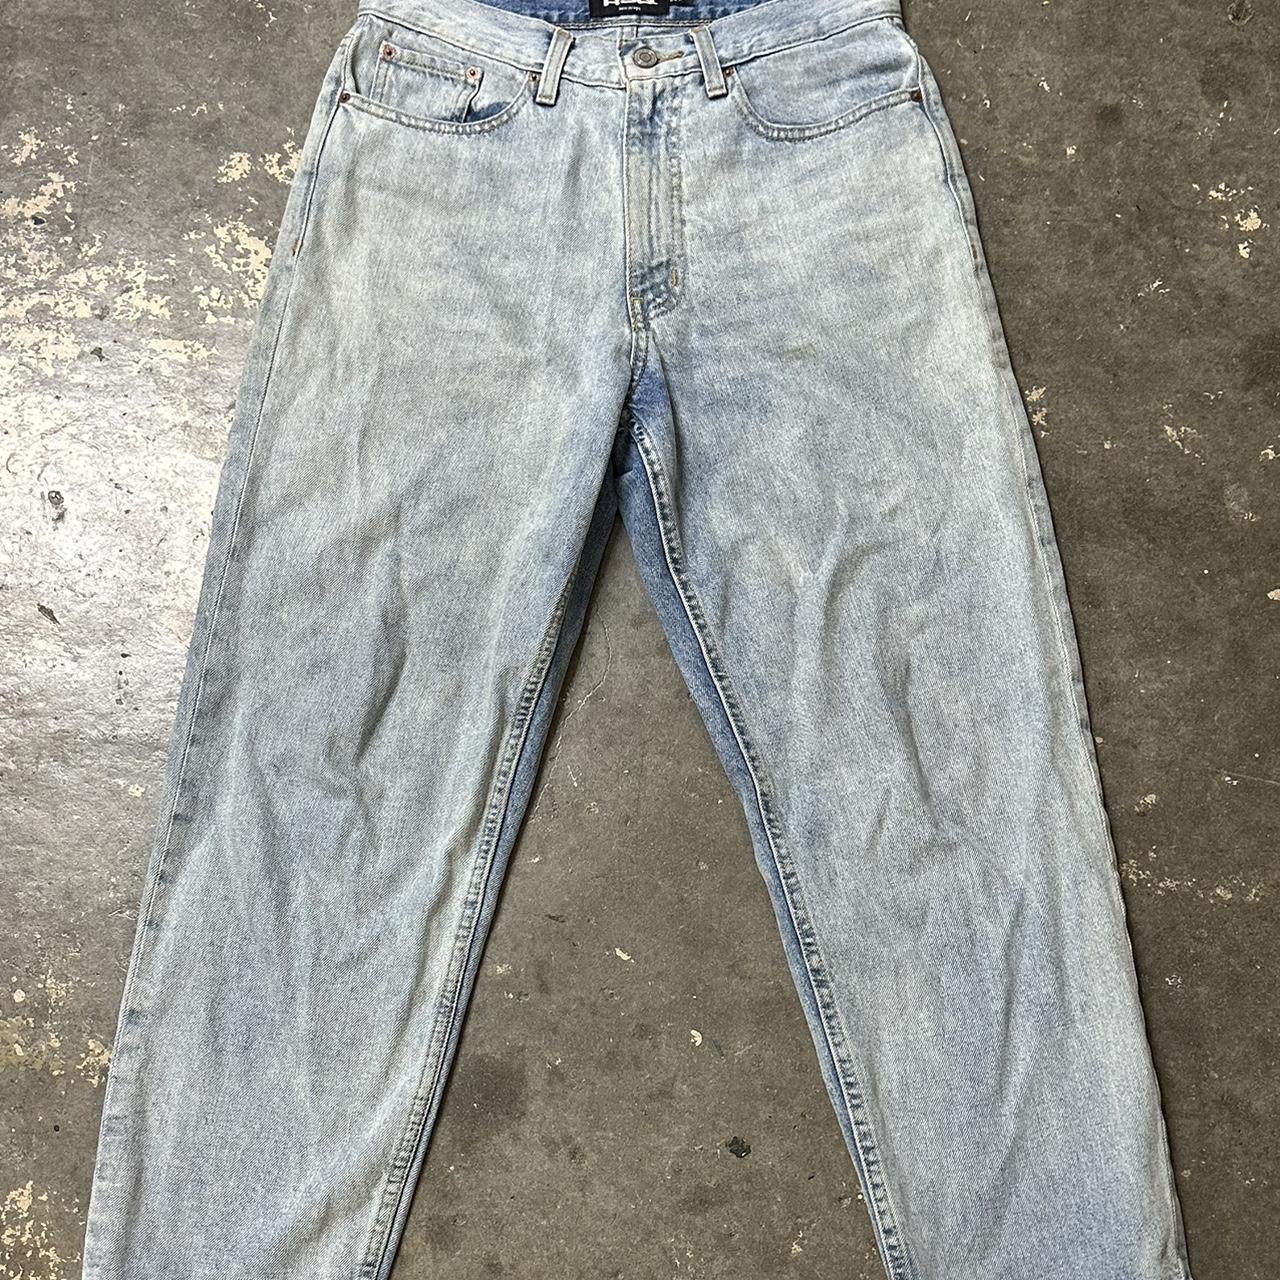 RSQ Men's Blue and White Jeans | Depop